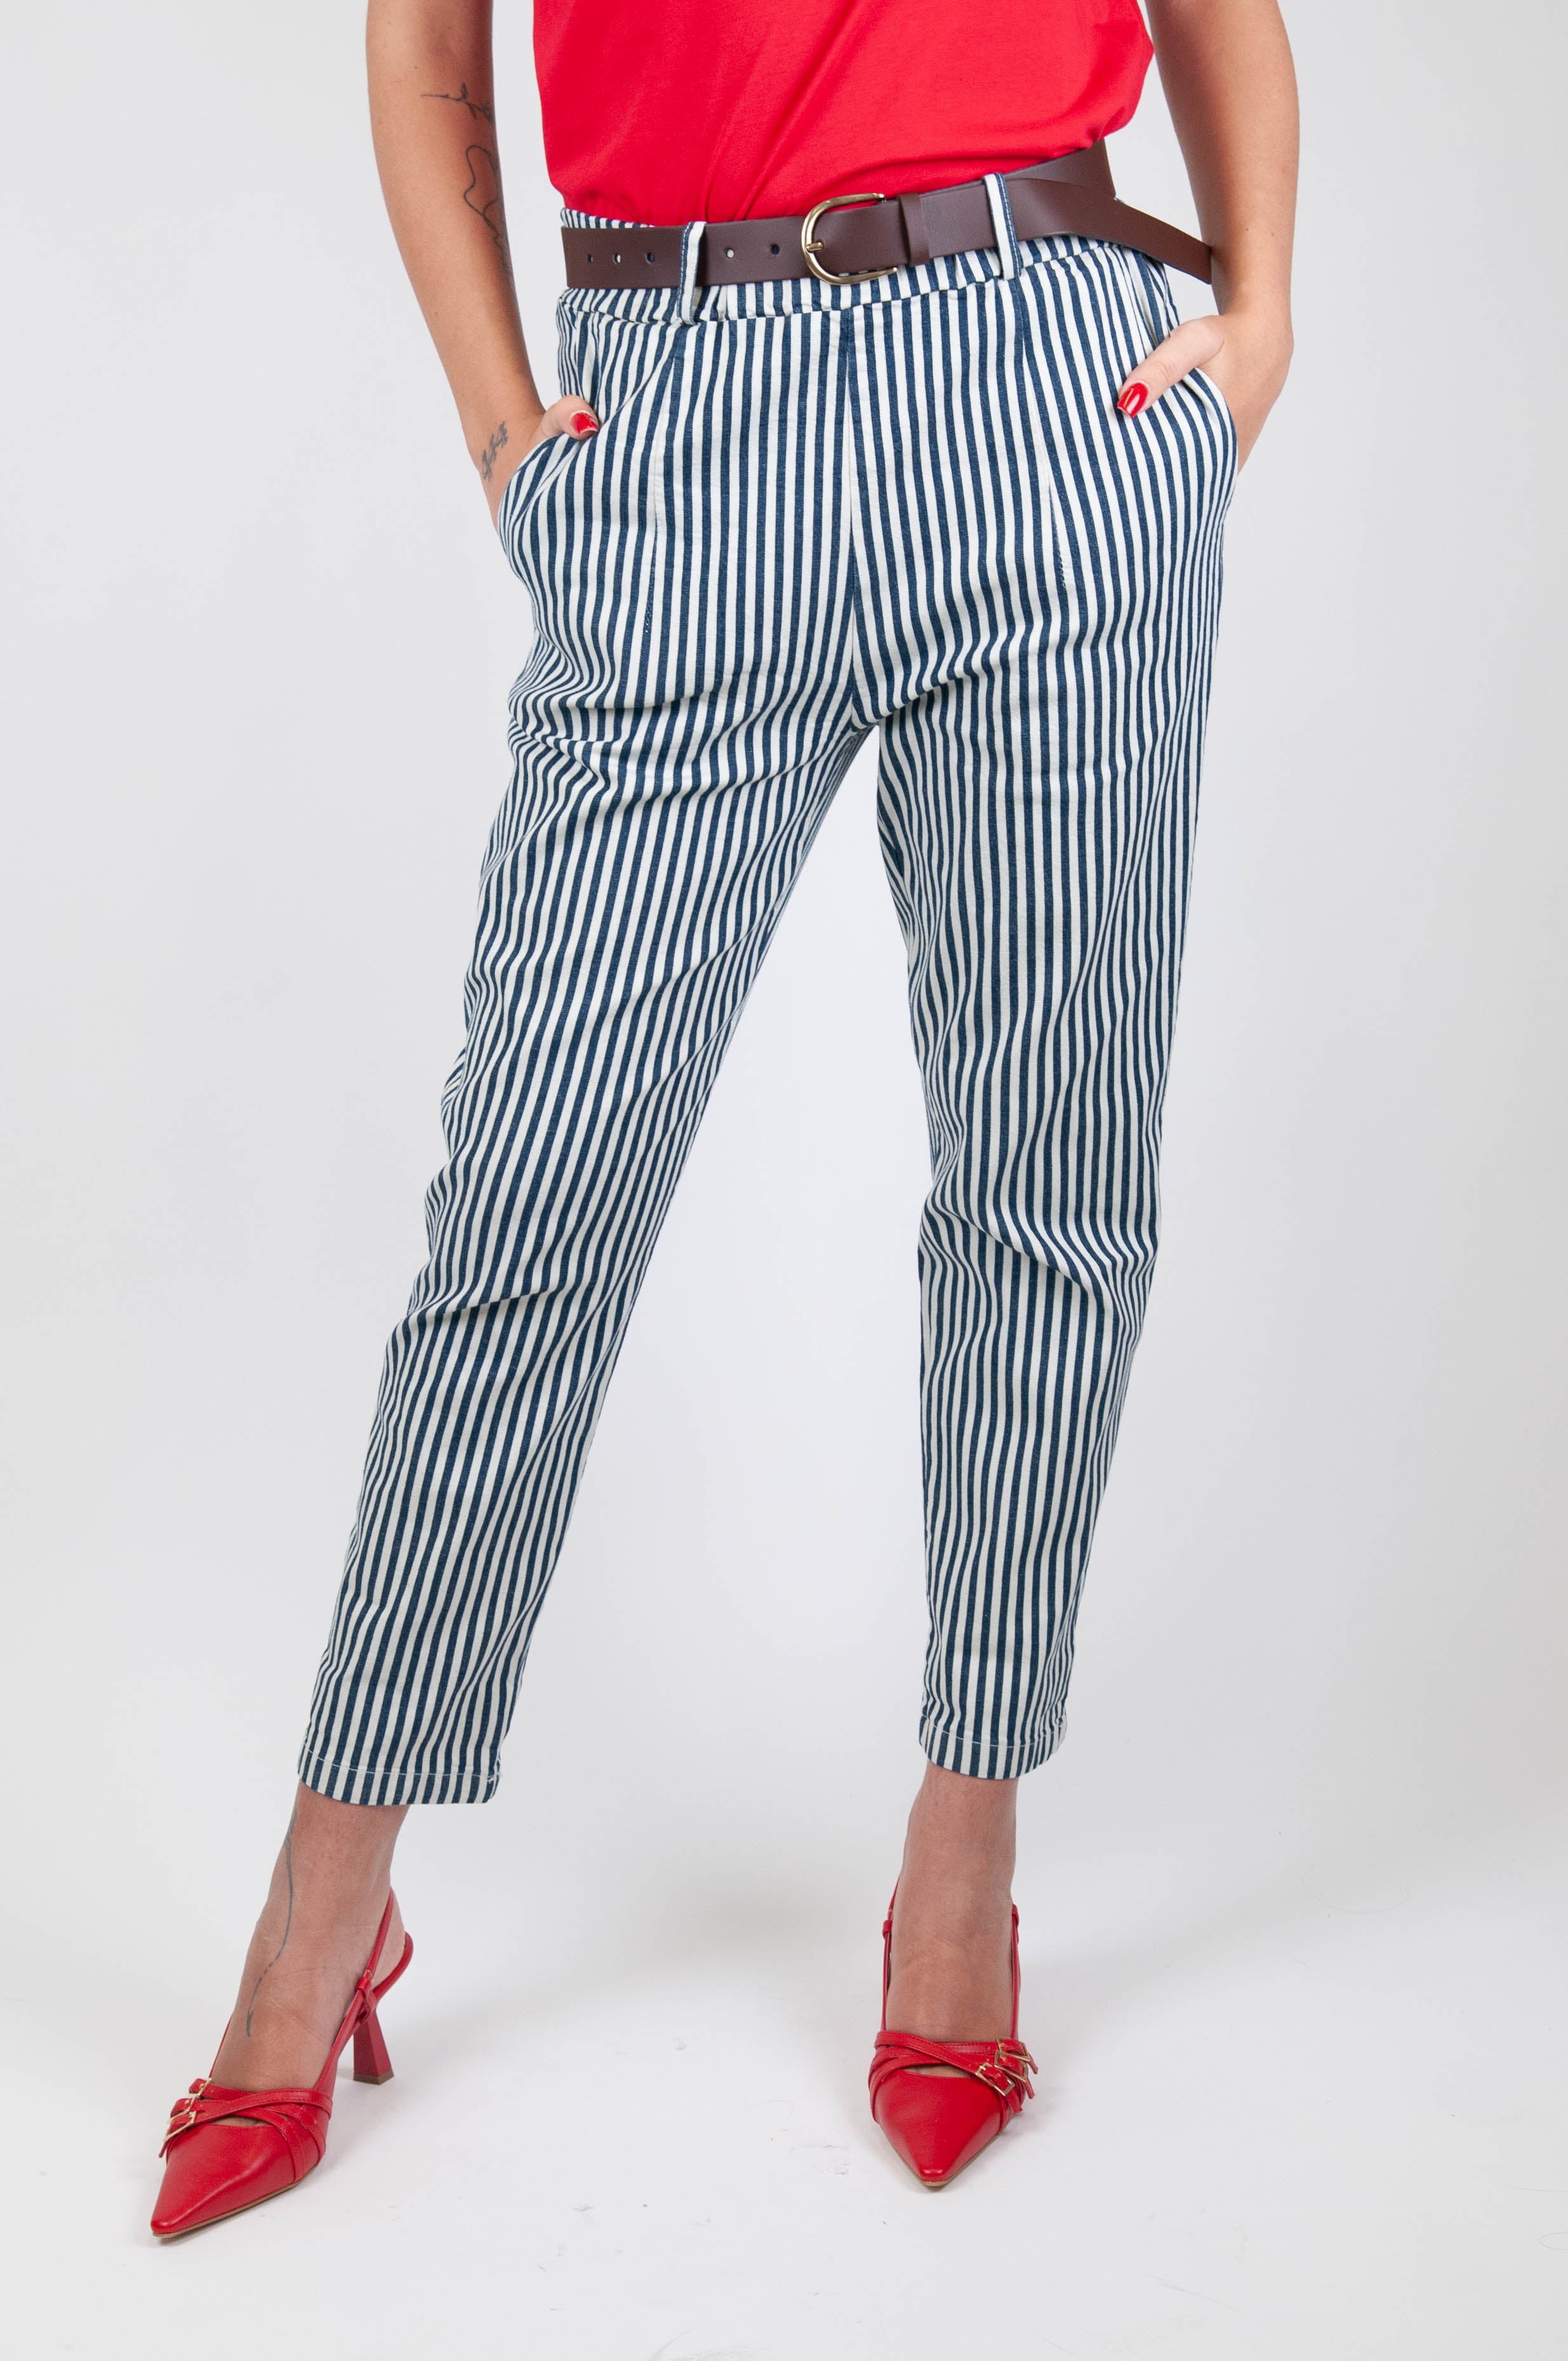 Tension in - Striped patterned trousers with pleats and dropped crotch